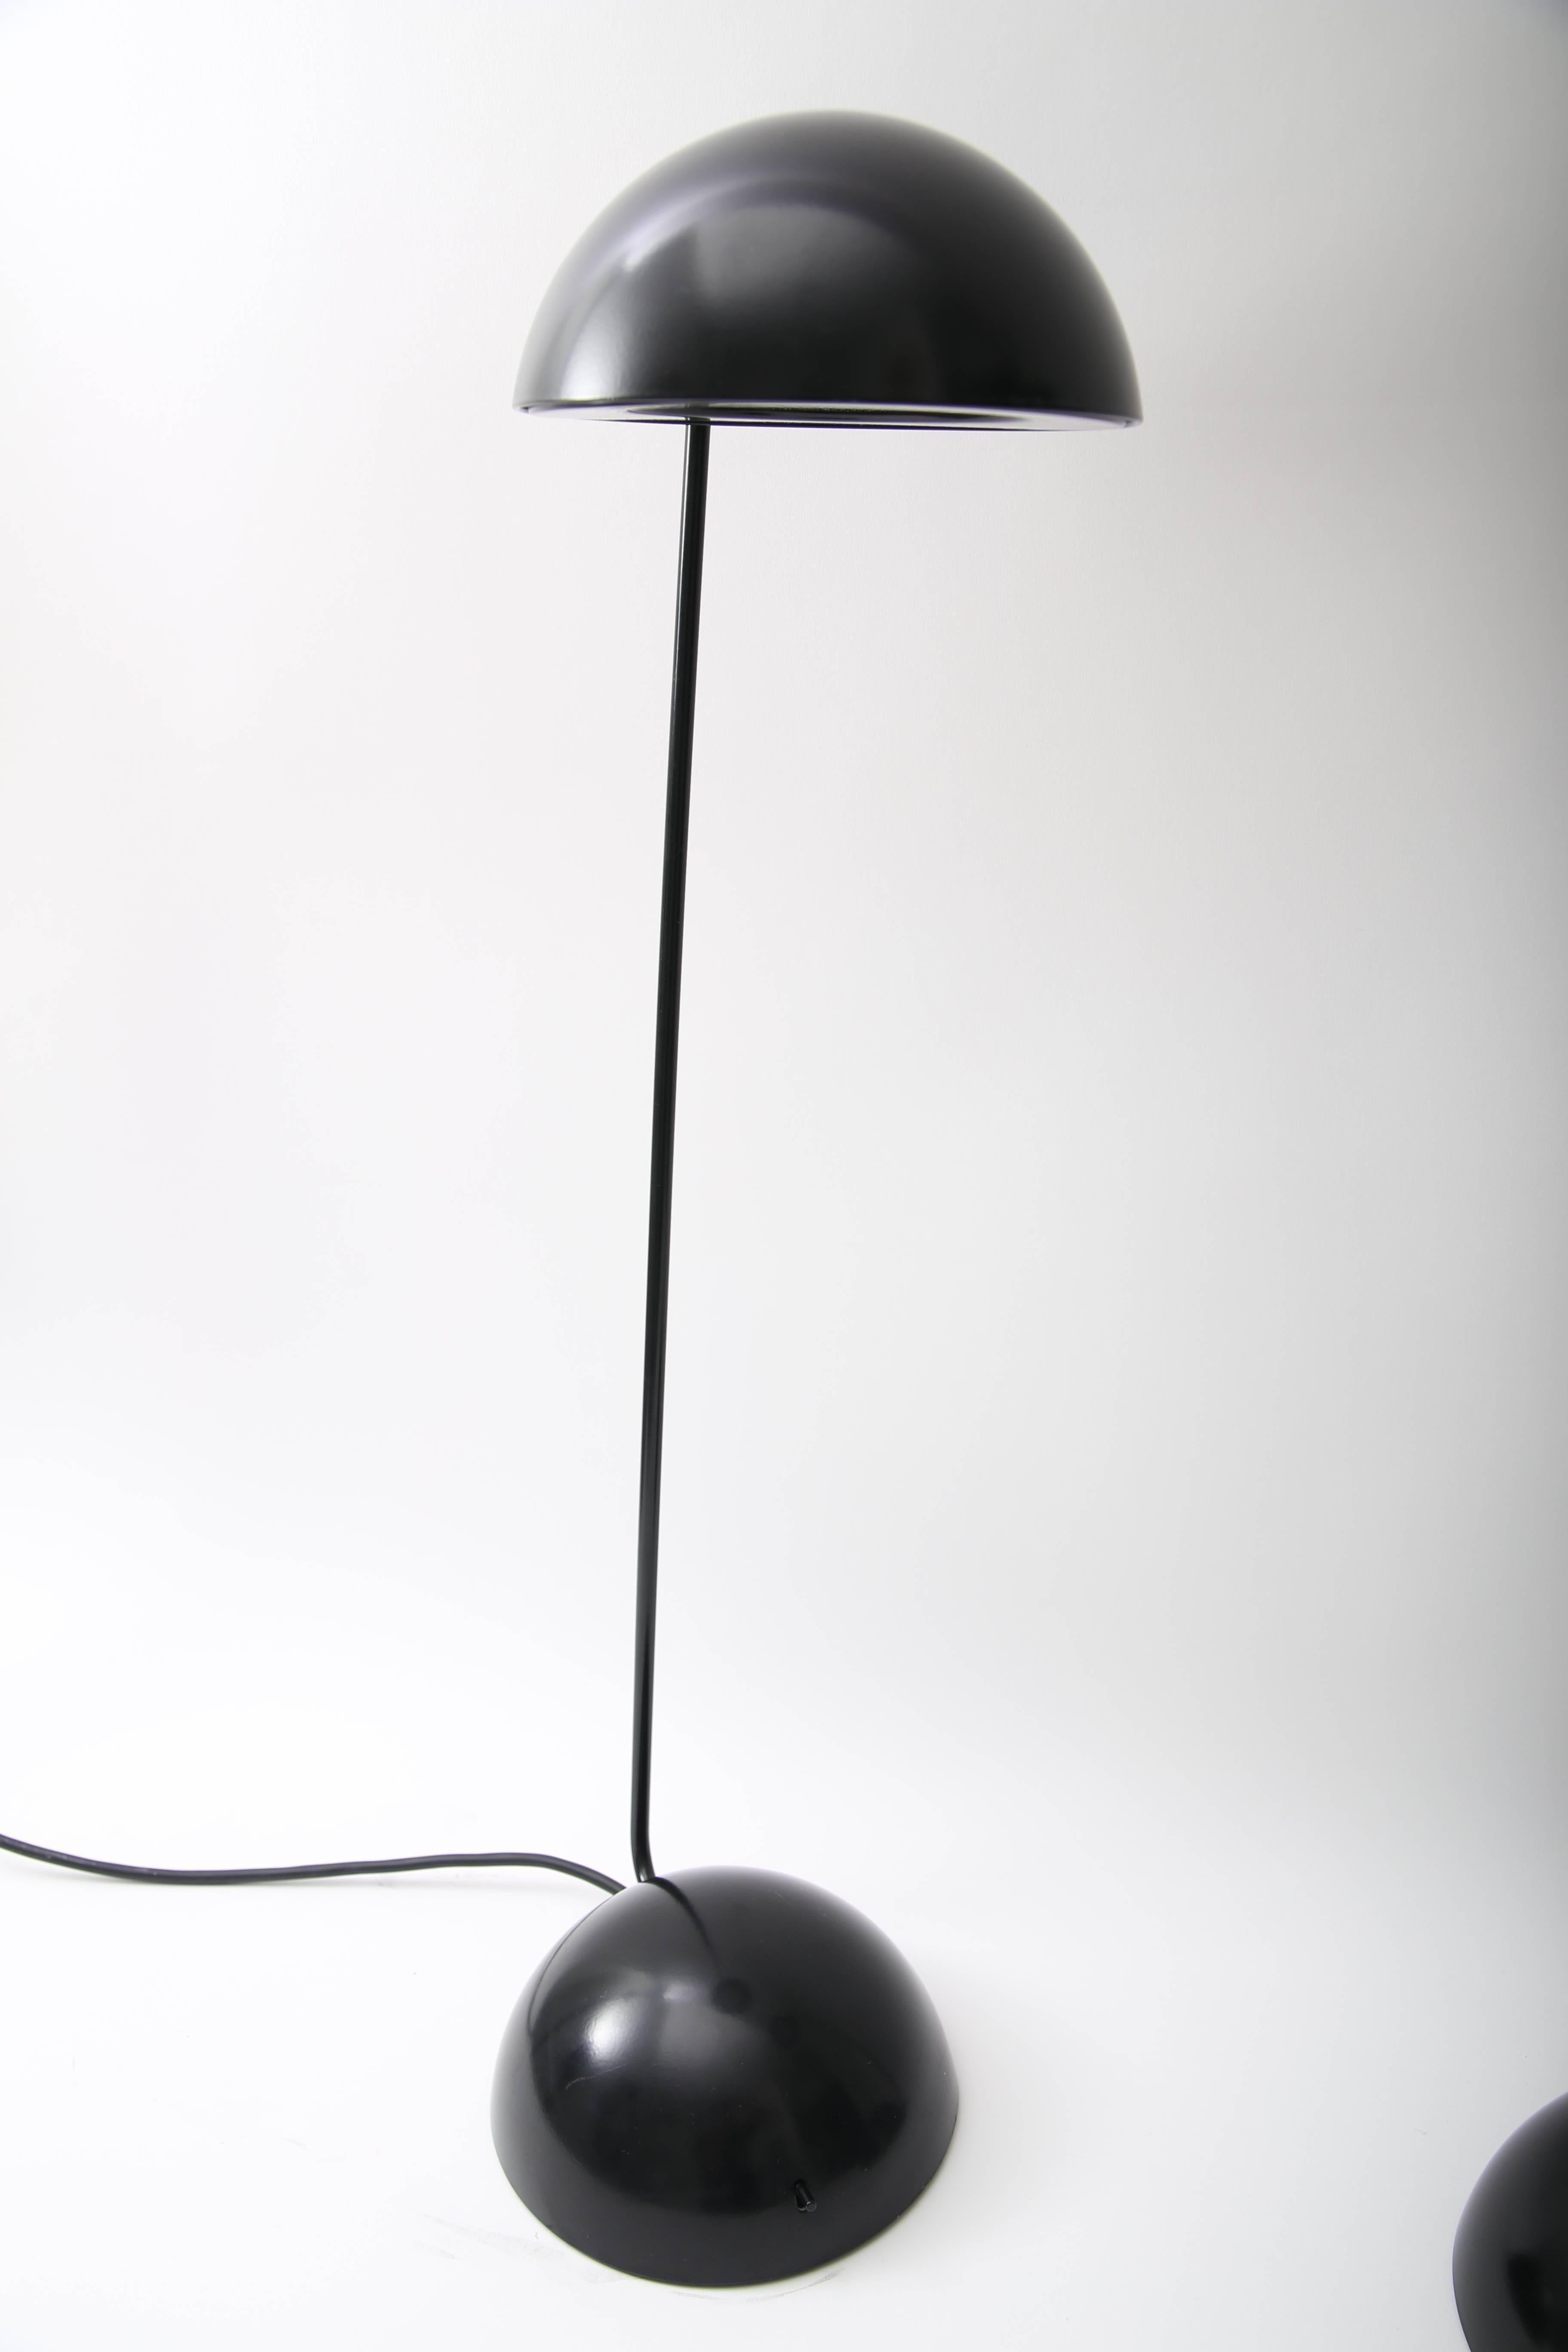 This pair of black table lamps were created by Barbieri & Marinelli for Thonconi and are known as the 